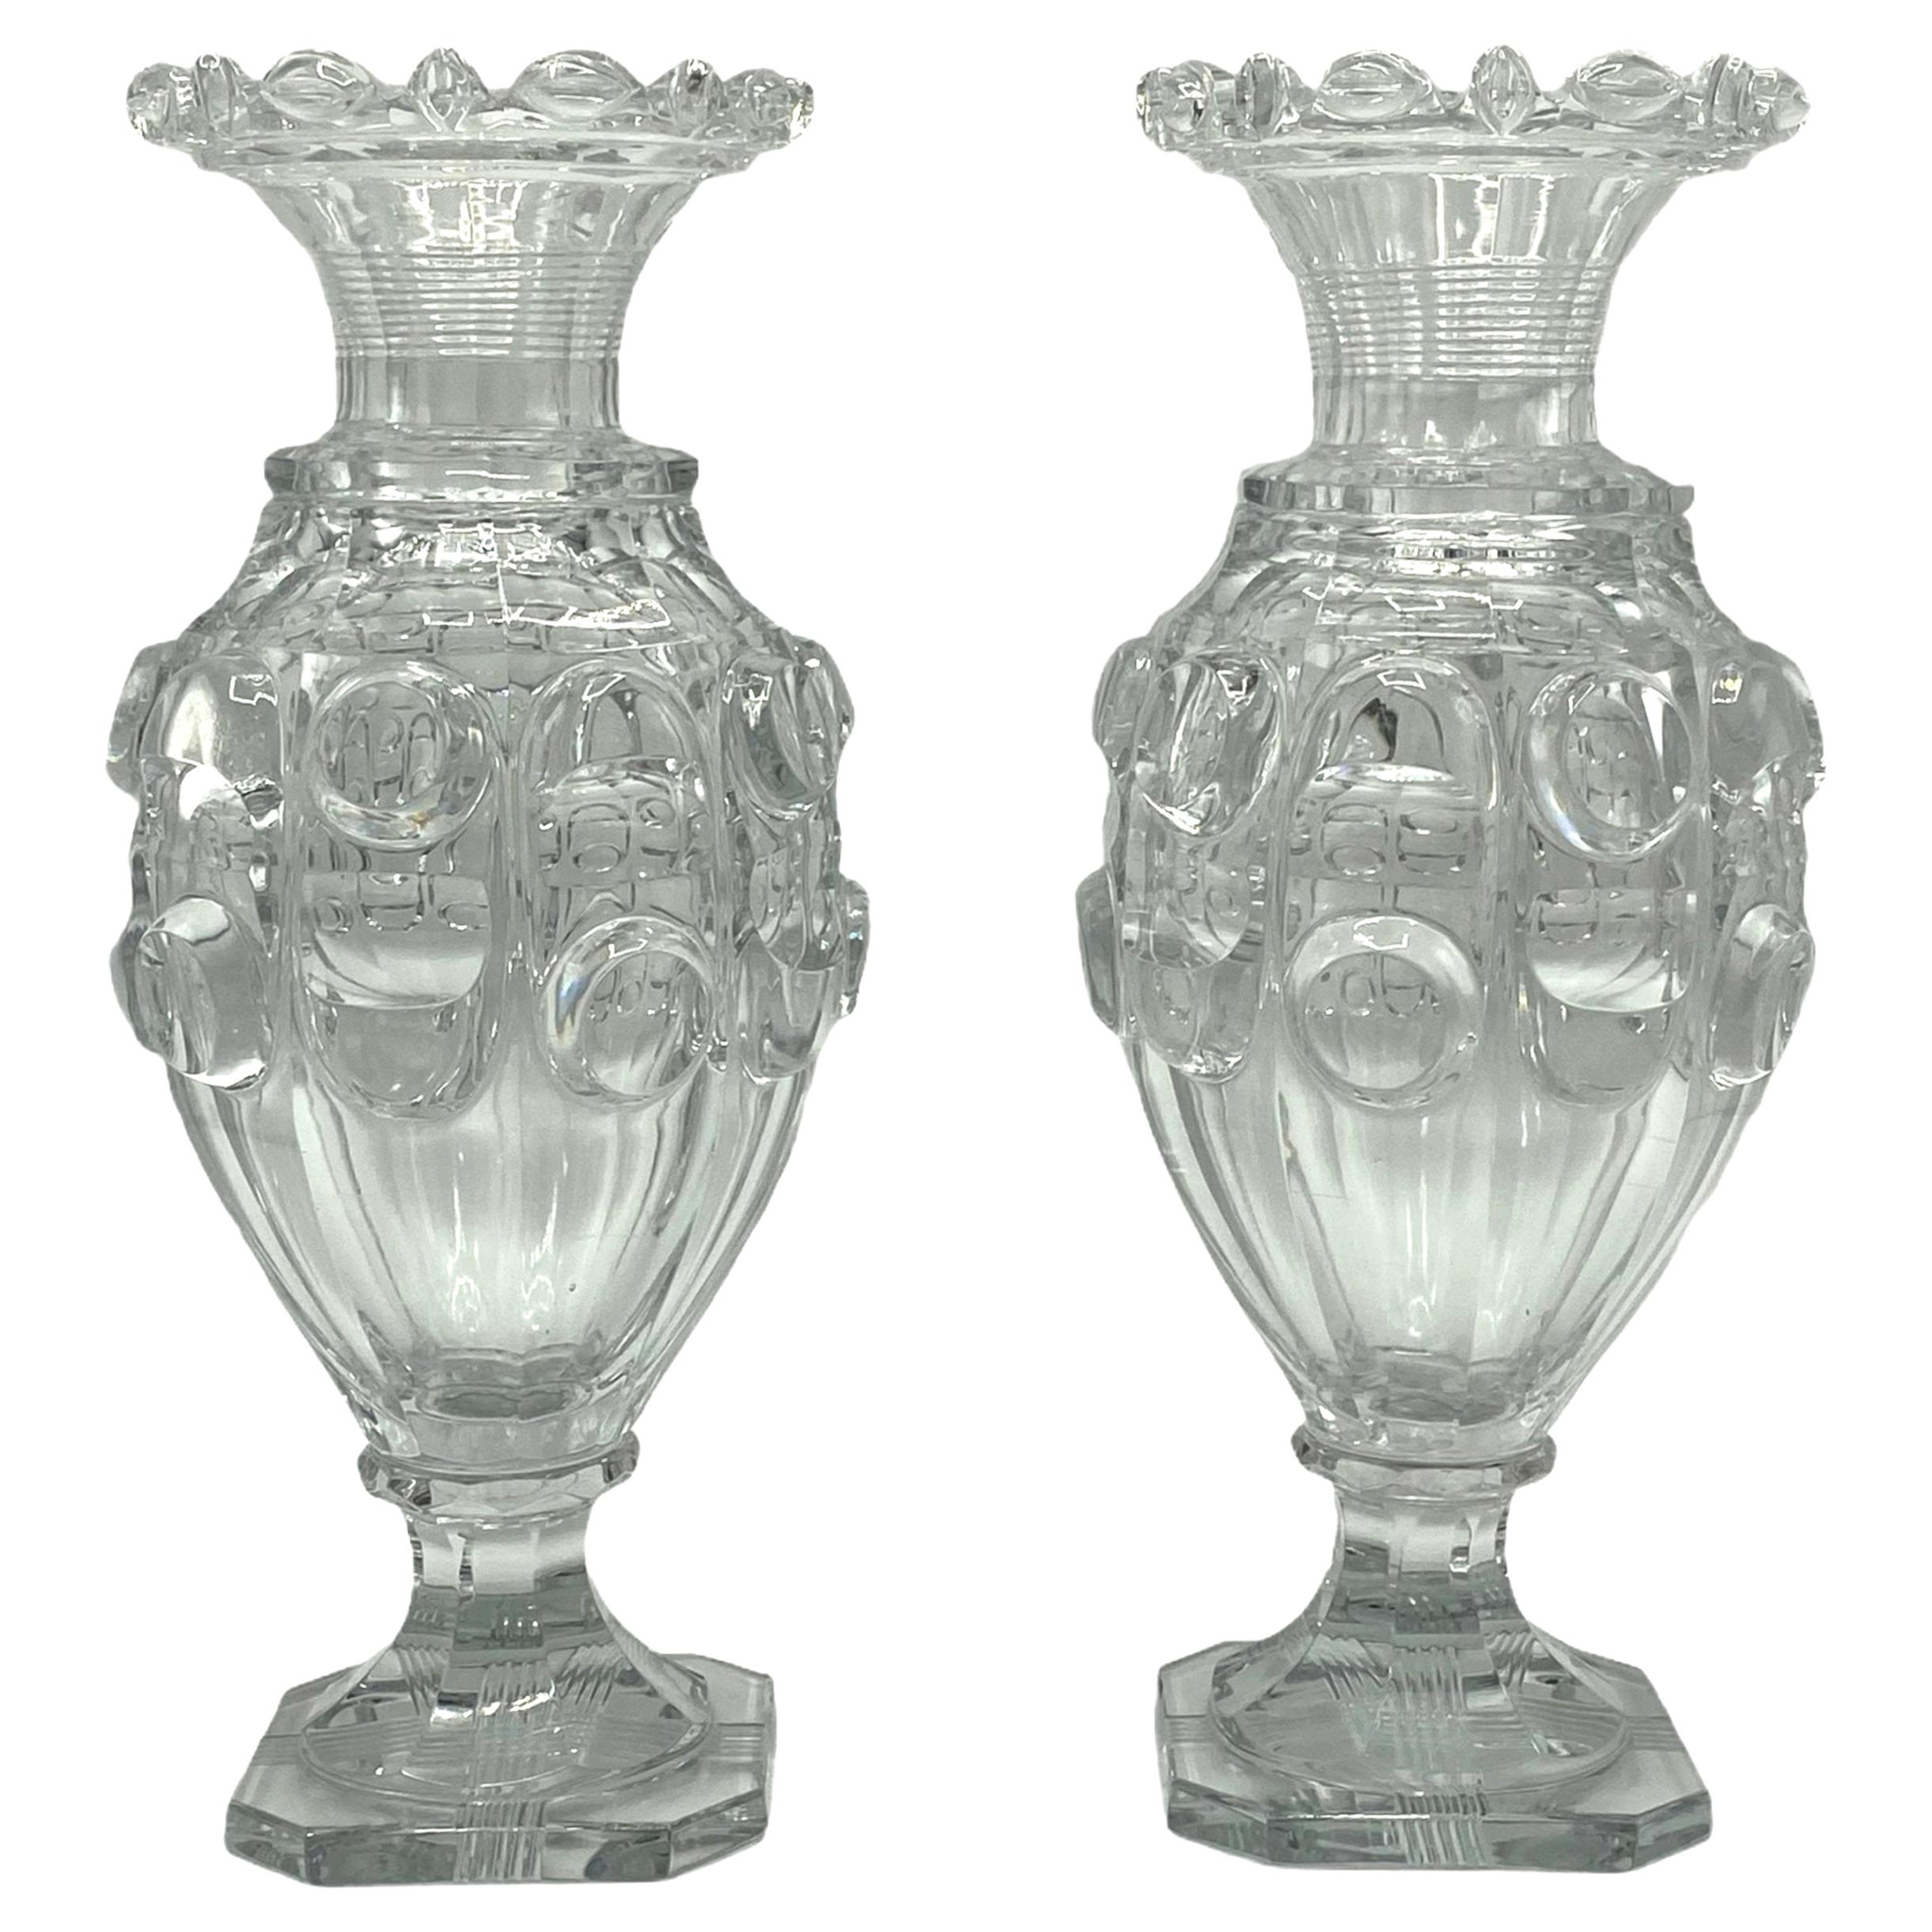 Pair of Baccarat Attributed Cut Crystal Vases